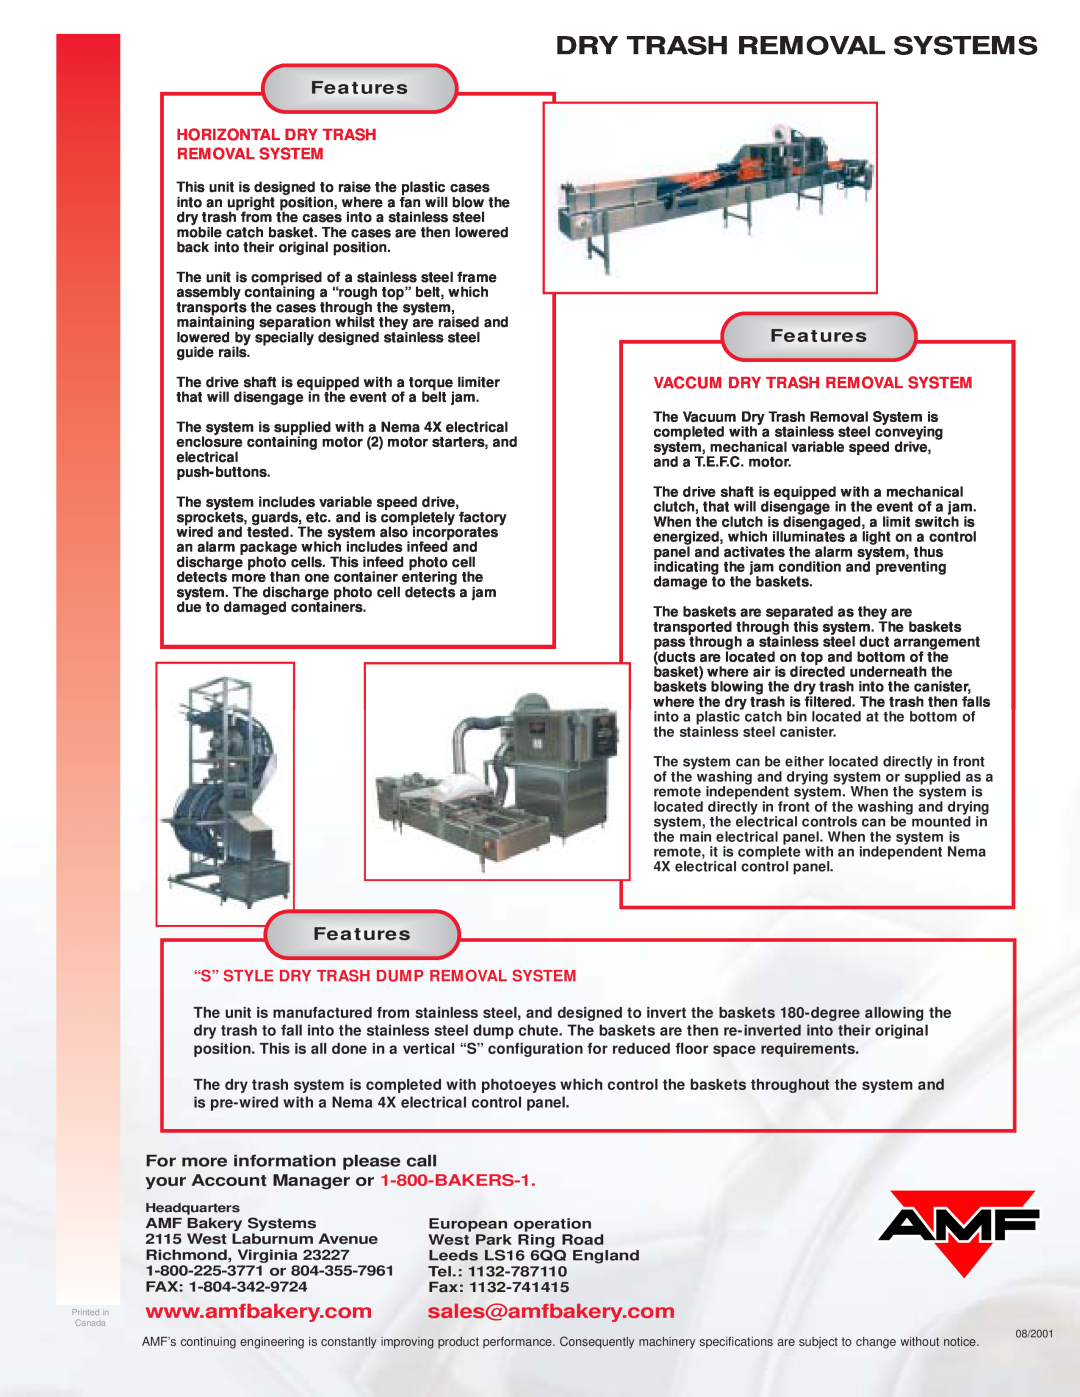 AMF Dry Trash Removal Systems manual Horizontal Dry Trash Removal System, Vaccum Dry Trash Removal System, Features 